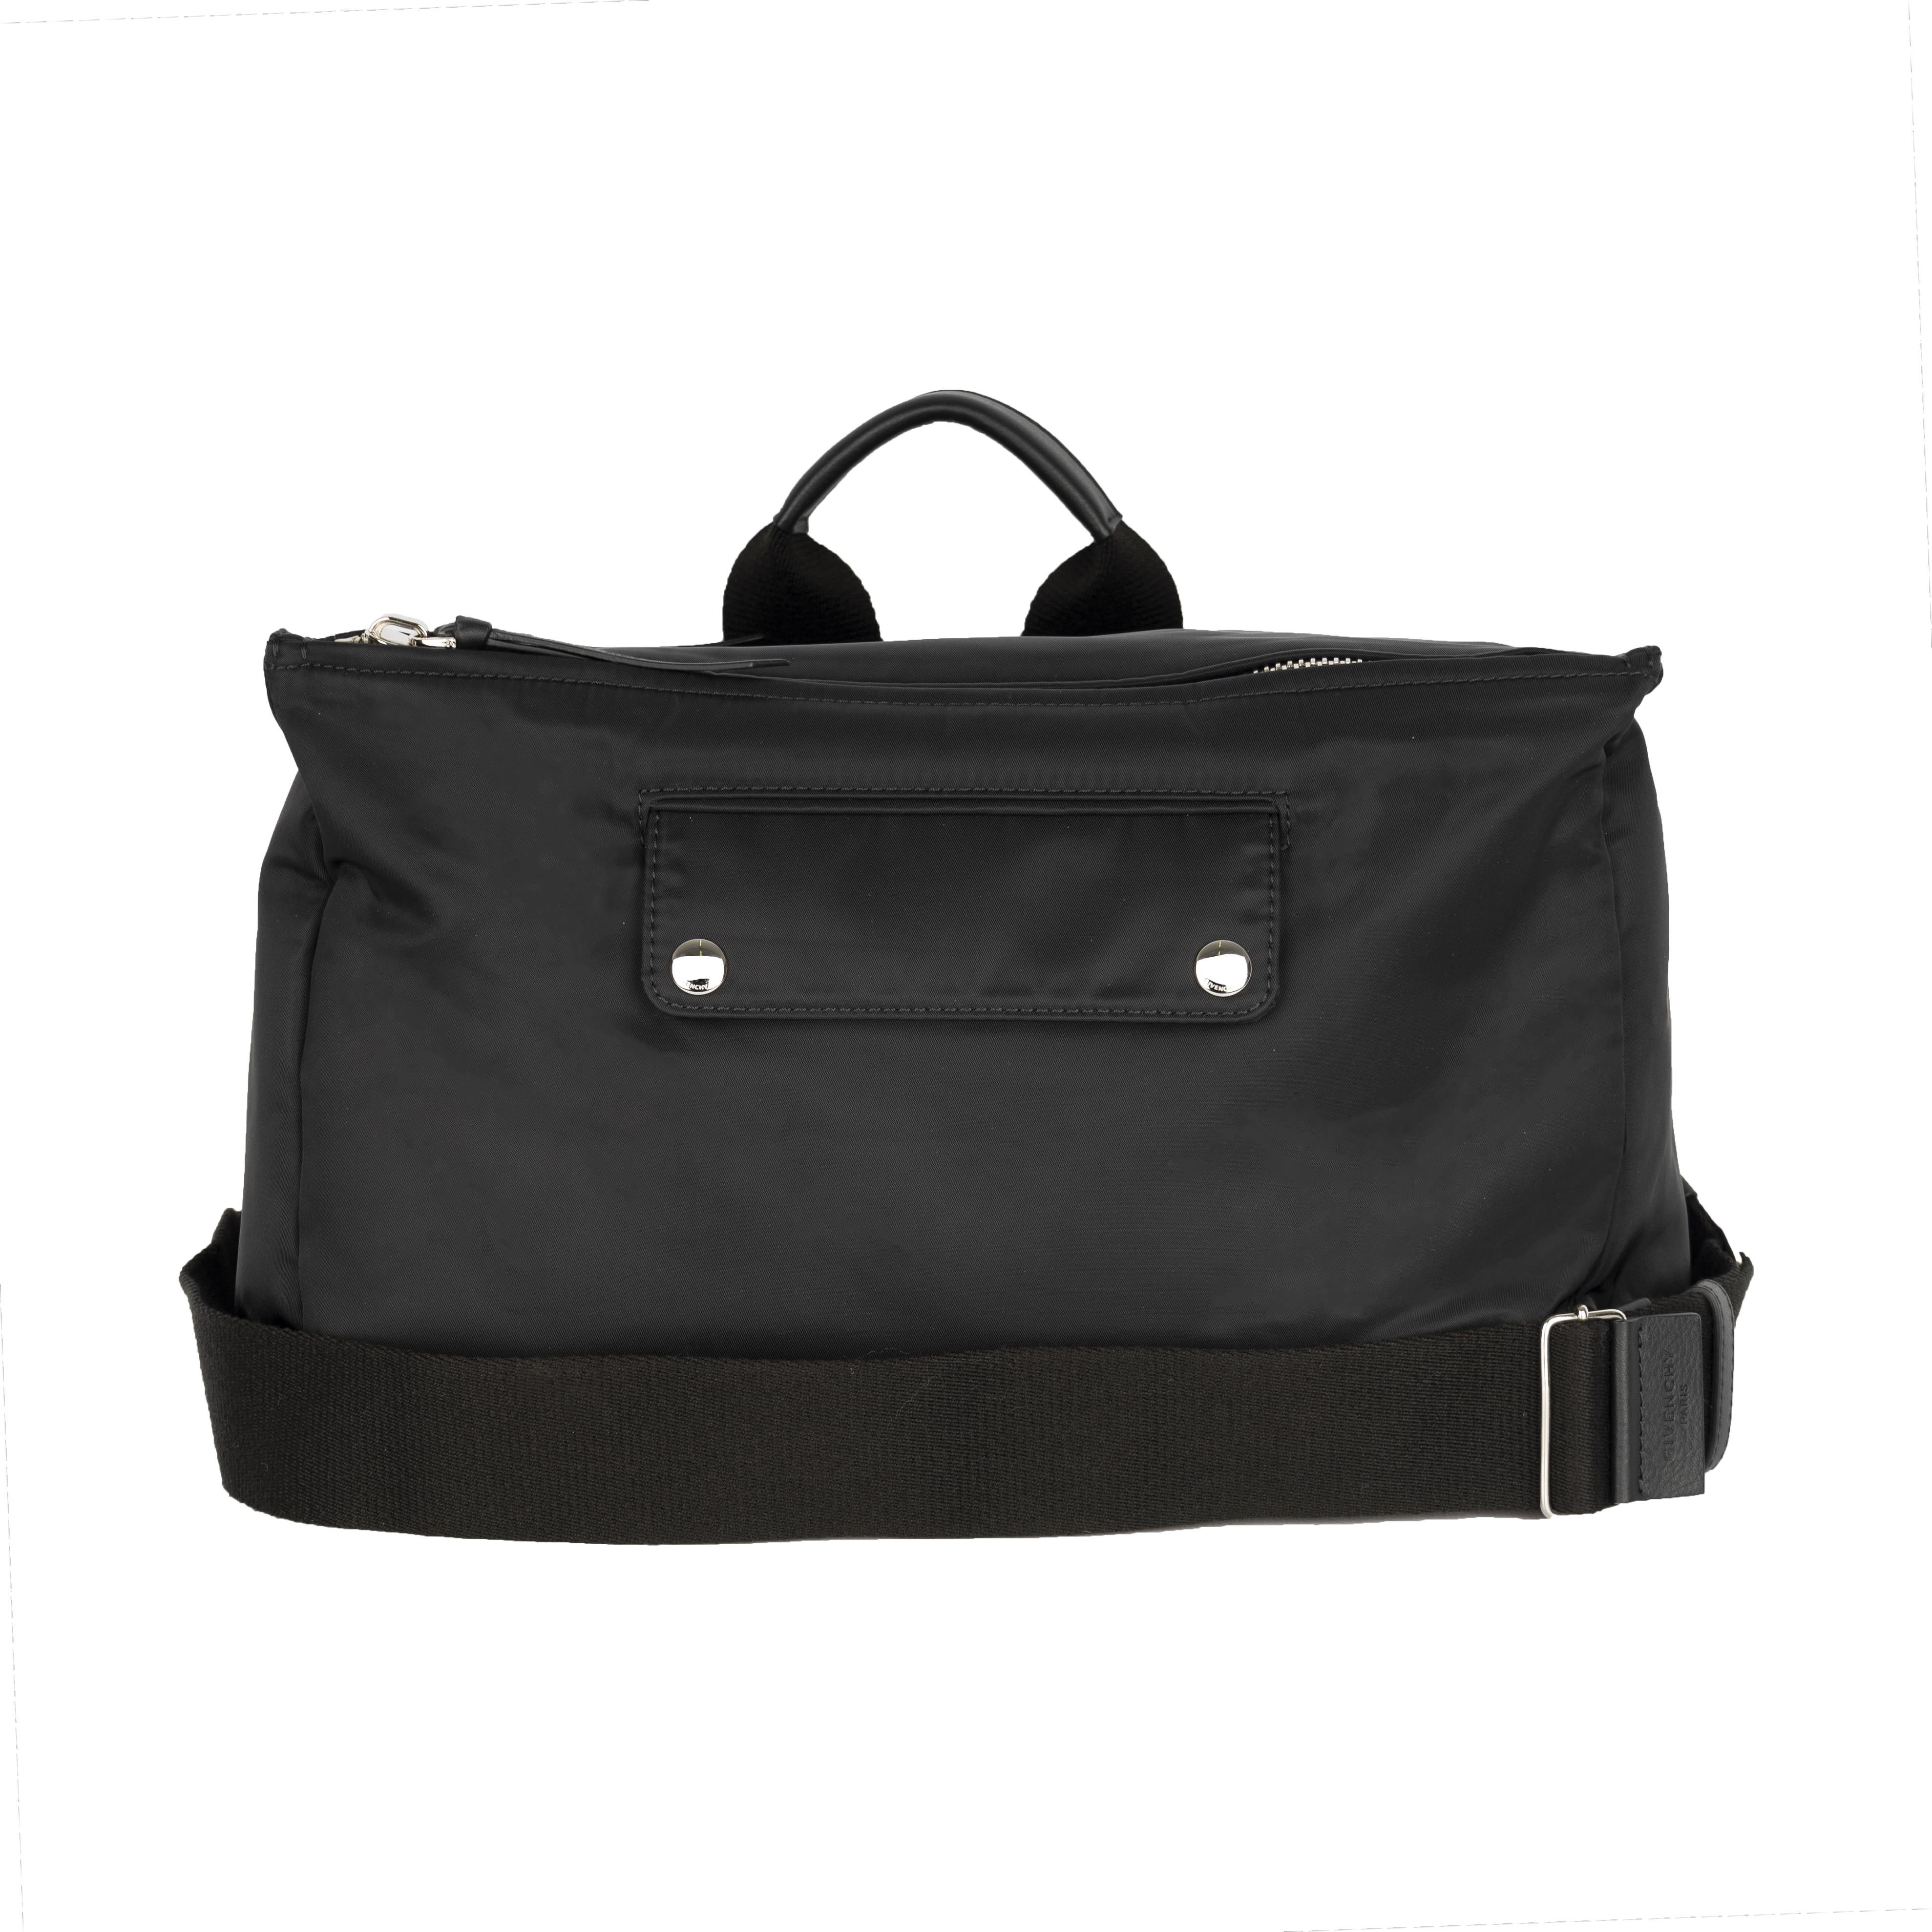 Made with nylon, this Givenchy Pandora Messenger Bag is one-of-a-kind through unique elements such as the main compartment access near the handle and a similar sized pocket with zipper towards the front. The bag also includes smaller pockets: one